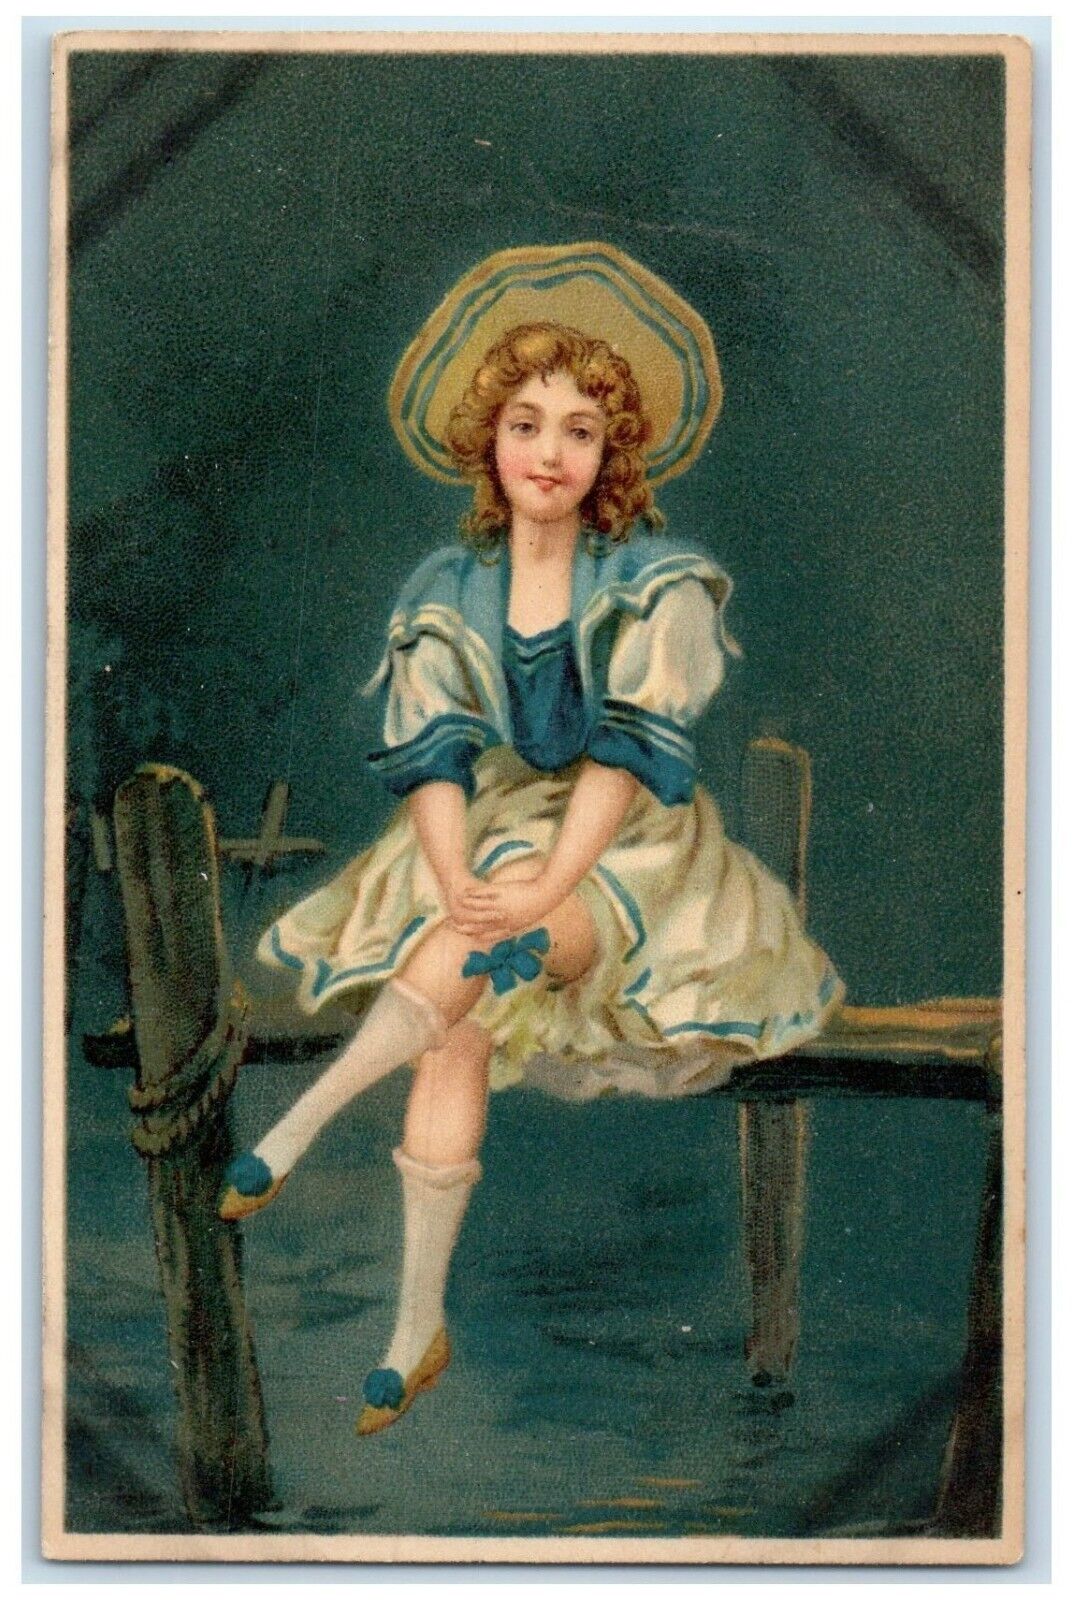 c1905 Pretty Girl Curly Hair Brown Hat Tuck's Unposted Antique Postcard